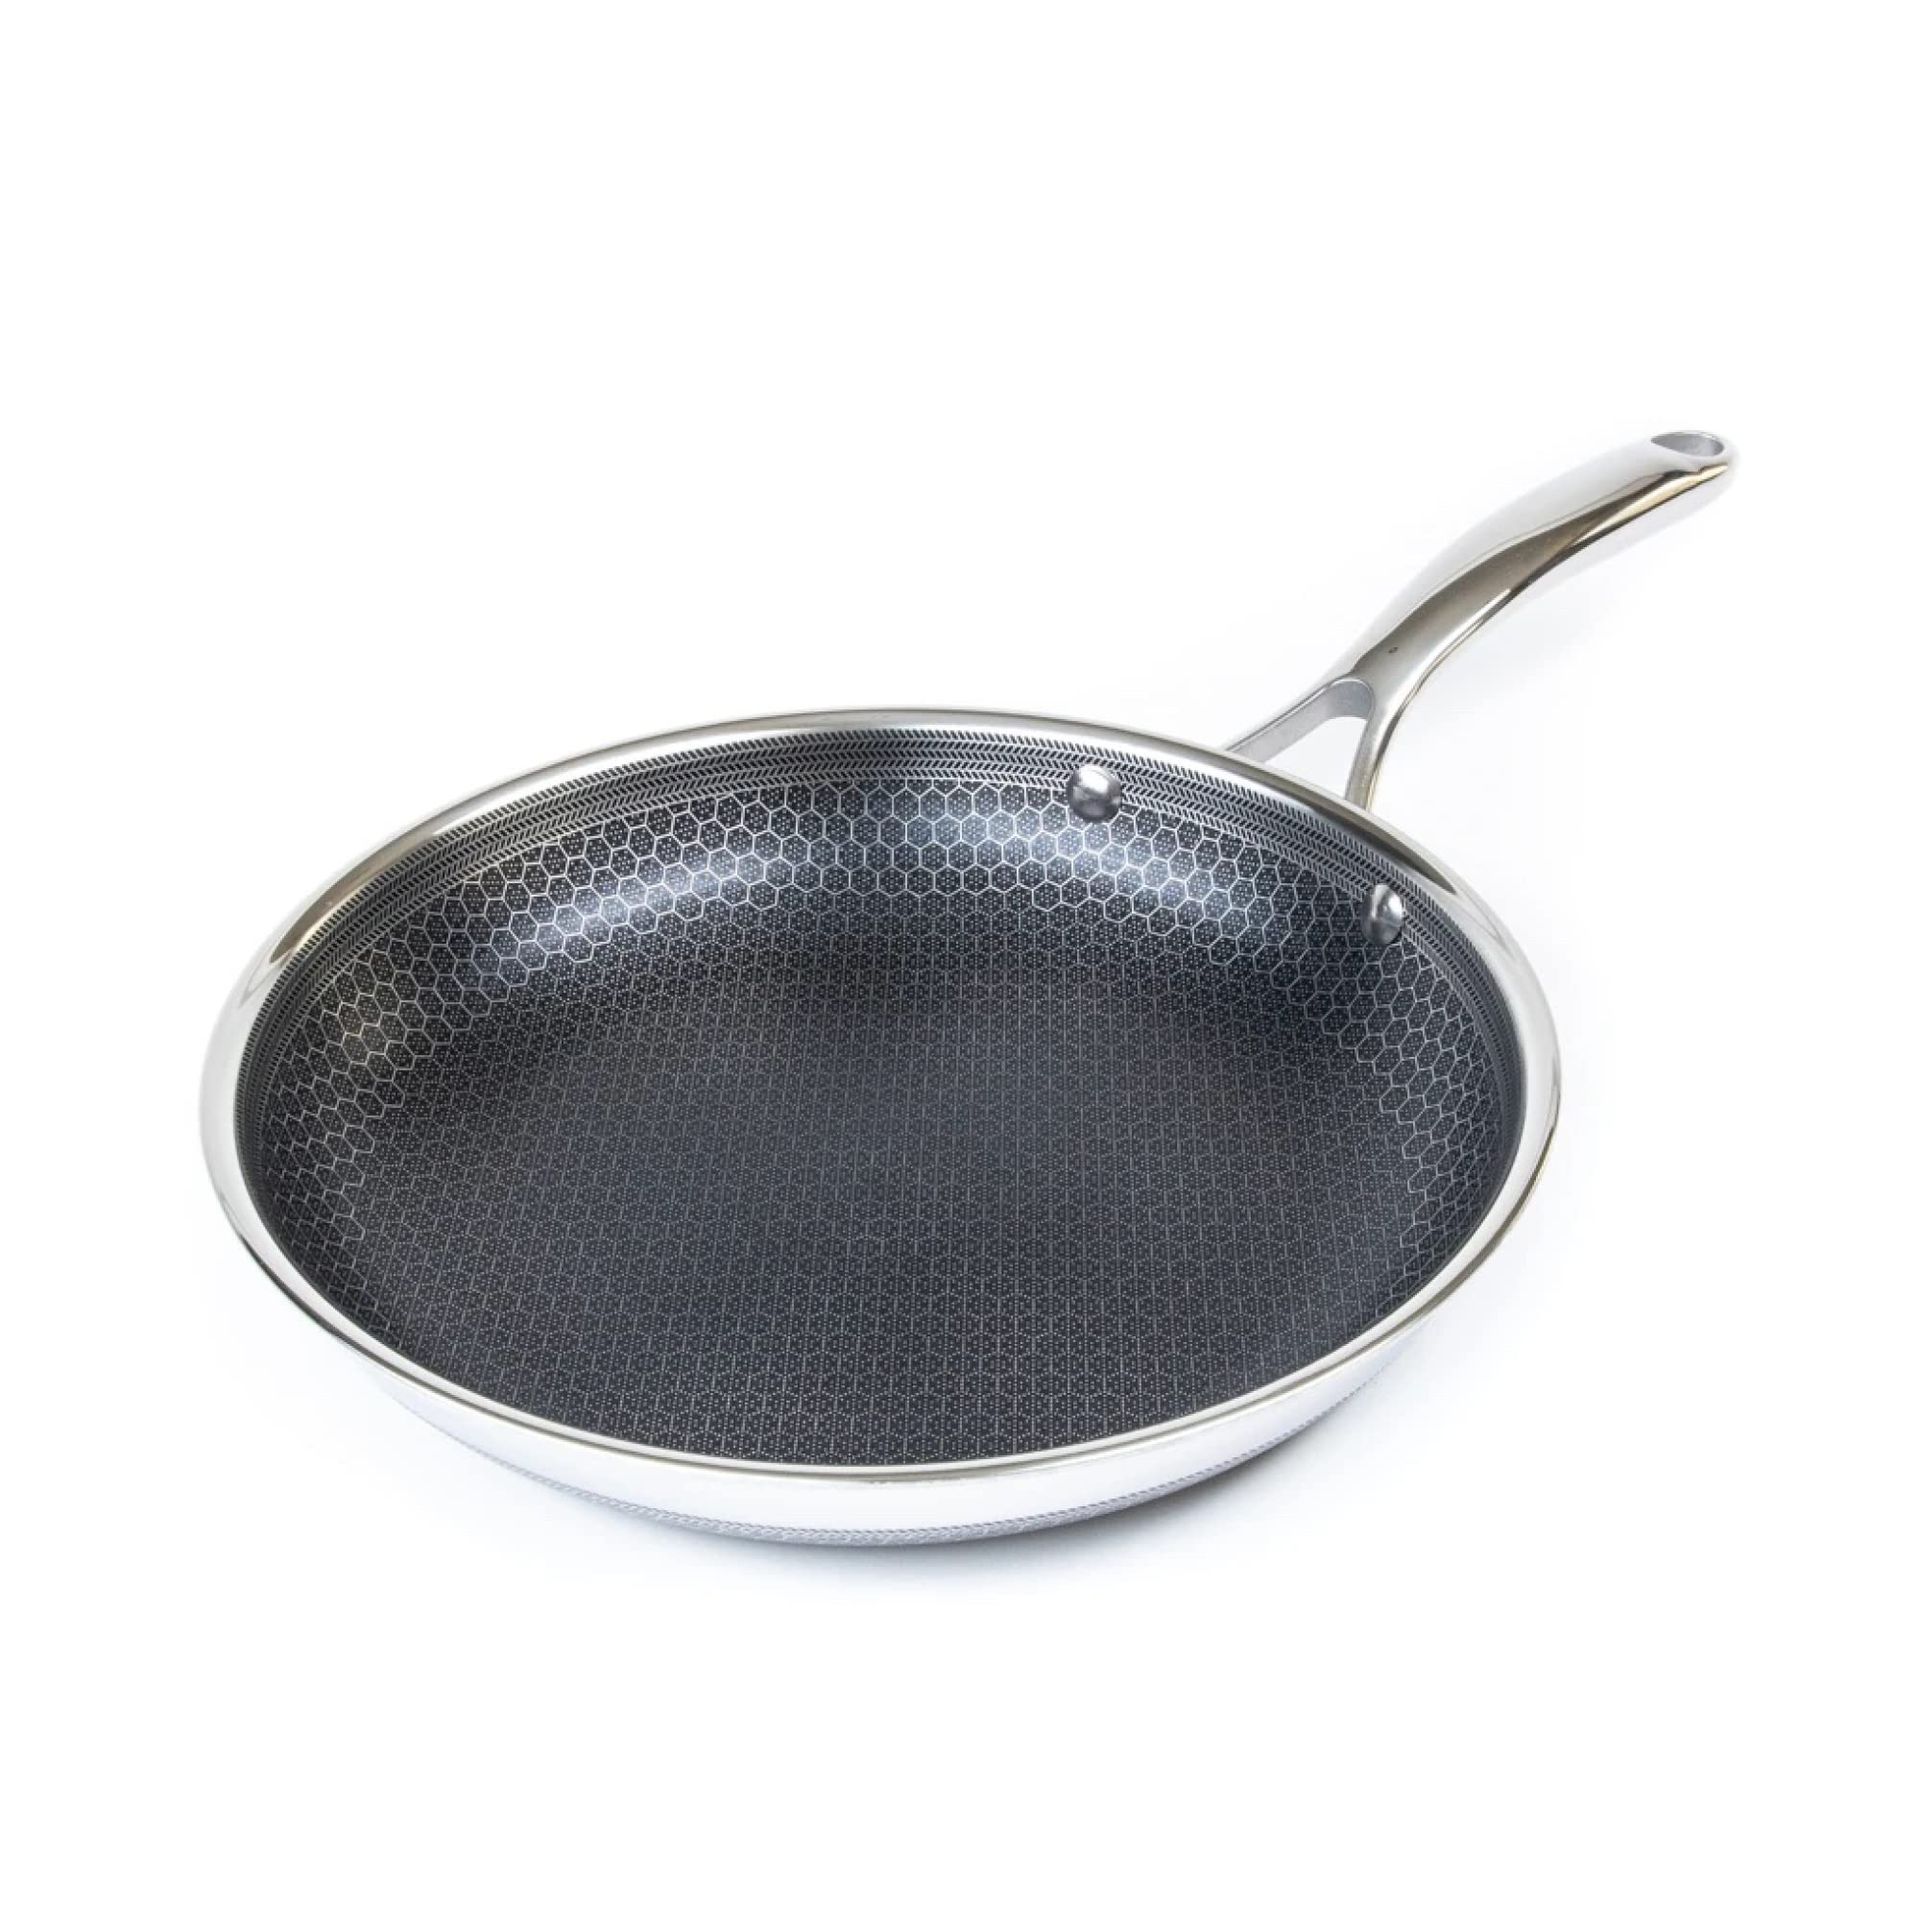 9 of the best non-stick frying pans tested by our editors | Real Homes